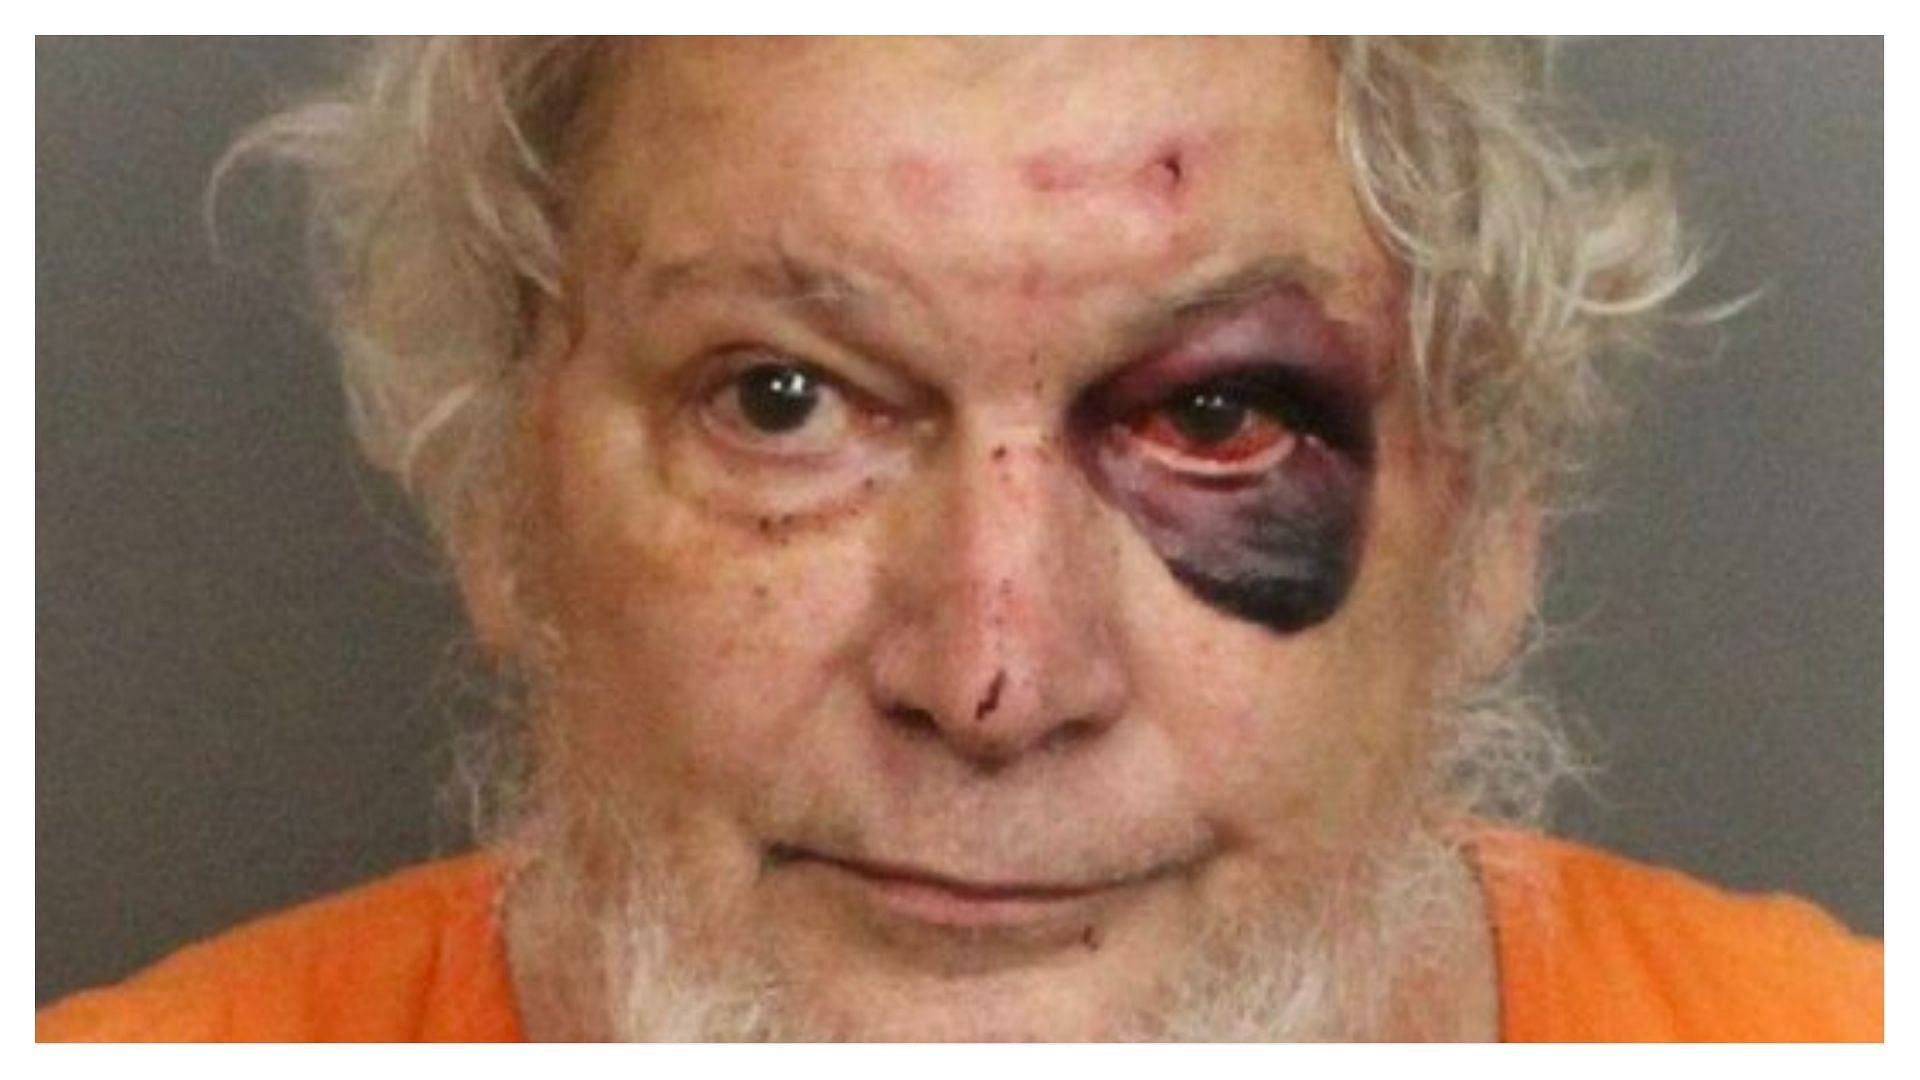 Smith was struck with a chair by a church attendee (Image via VietnmVetDghtr/Twitter)